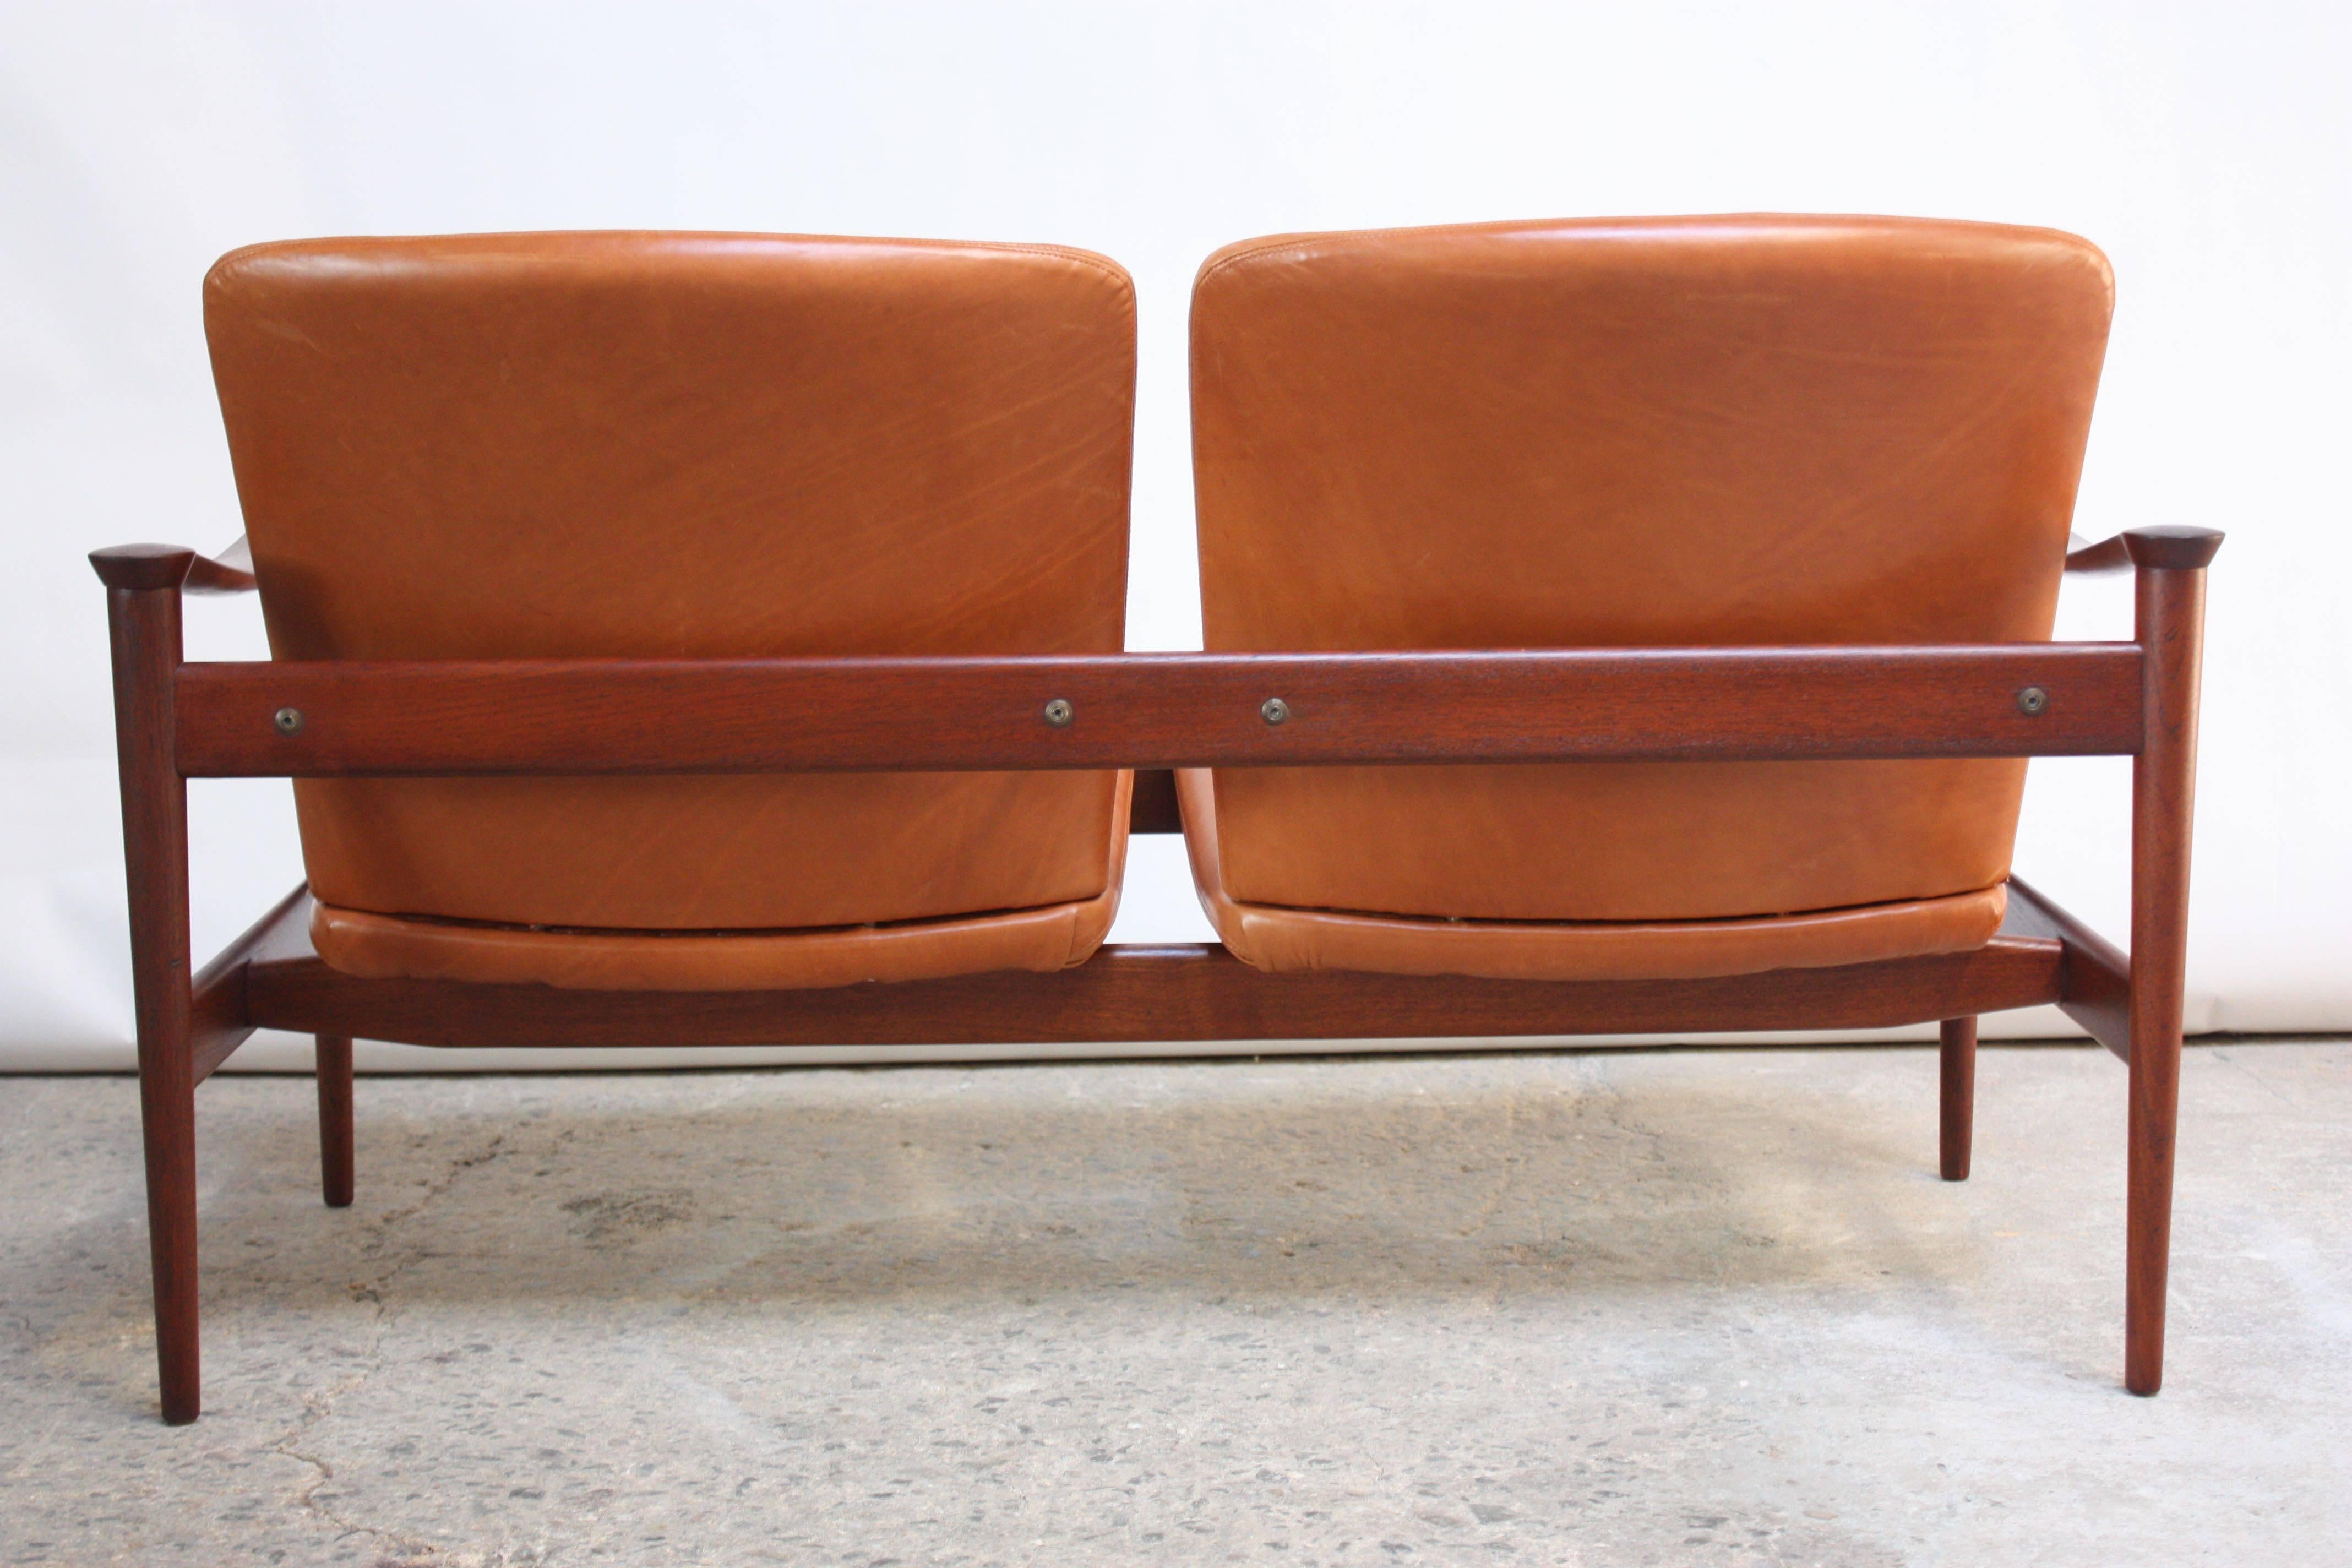 Vintage Norwegian Modern Loveseat in Leather and Teak by Fredrik Kayser  In Good Condition For Sale In Brooklyn, NY